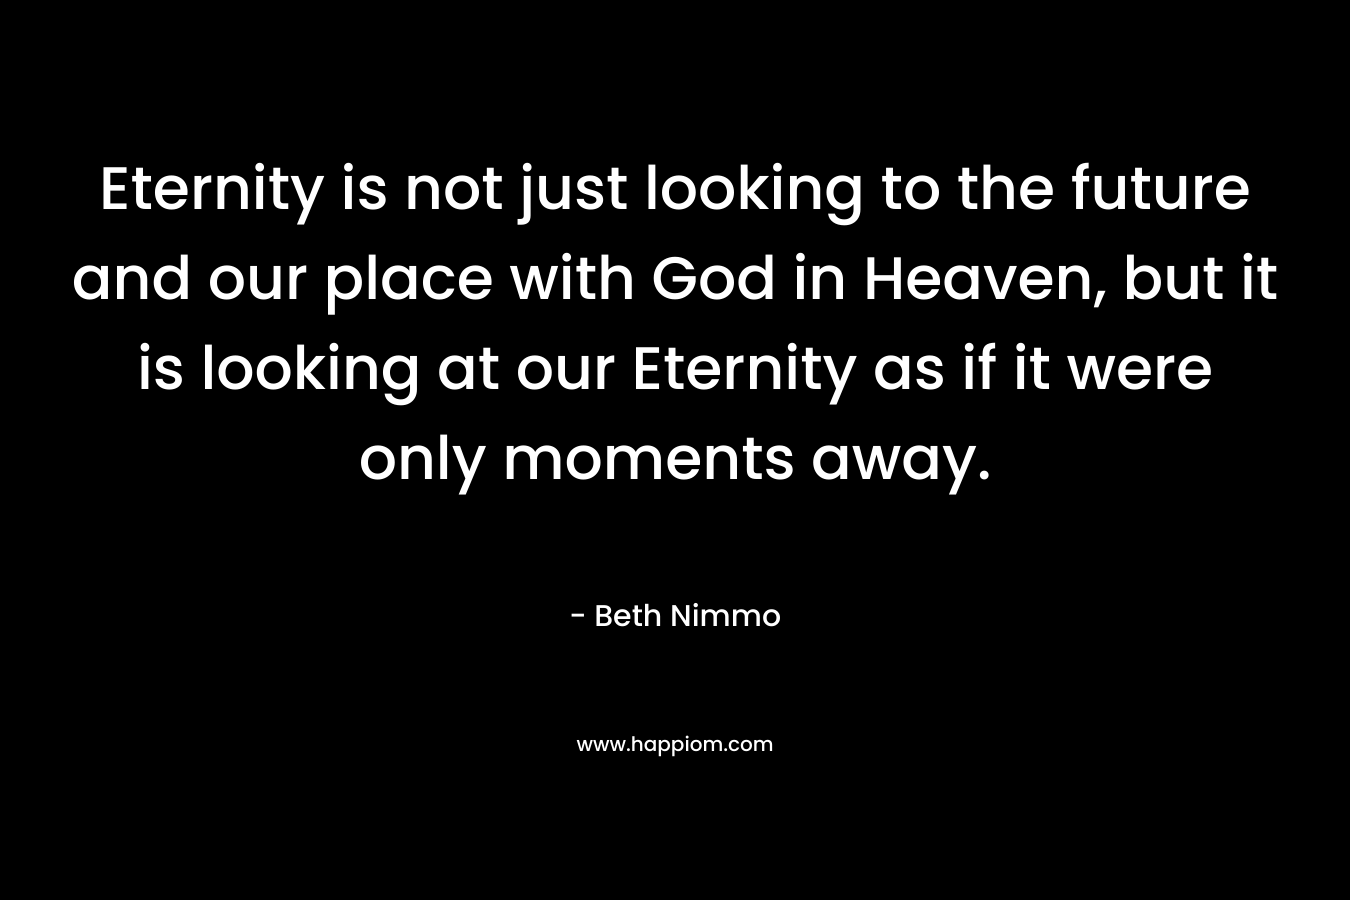 Eternity is not just looking to the future and our place with God in Heaven, but it is looking at our Eternity as if it were only moments away.